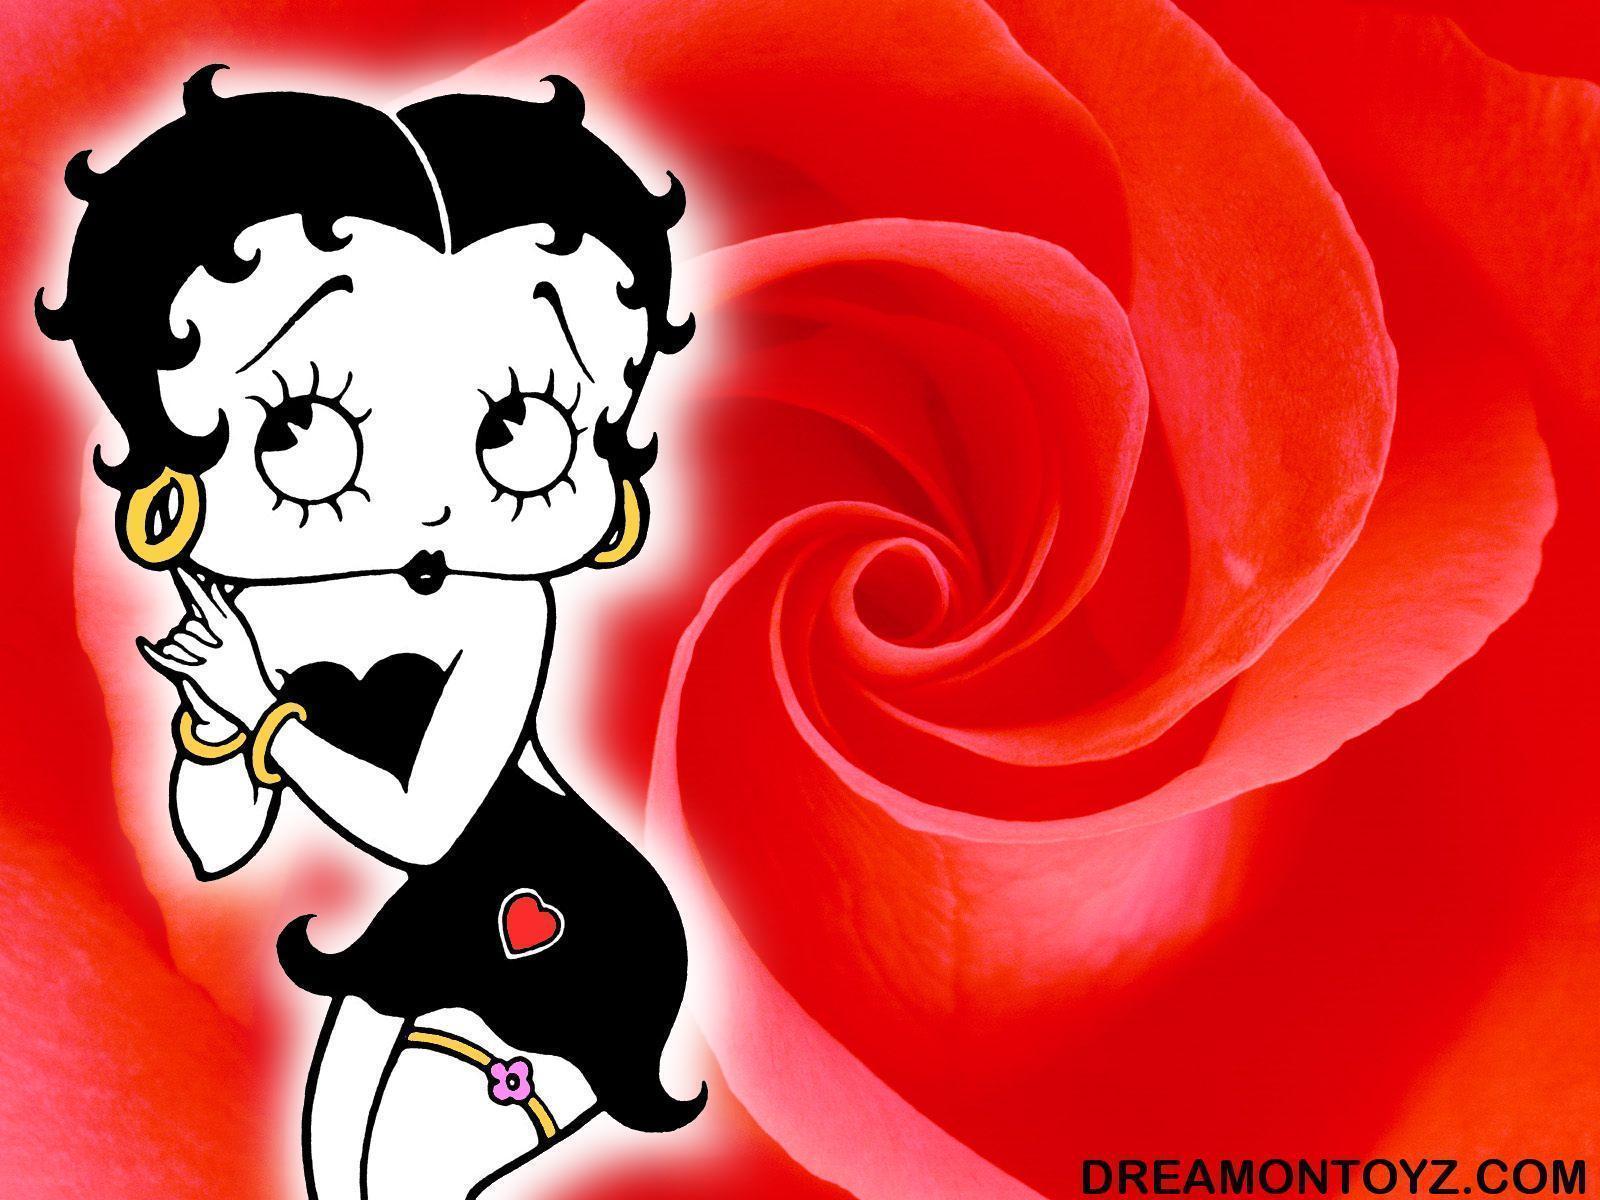 Betty Boop Wallpapers  Top Free Betty Boop Backgrounds  WallpaperAccess